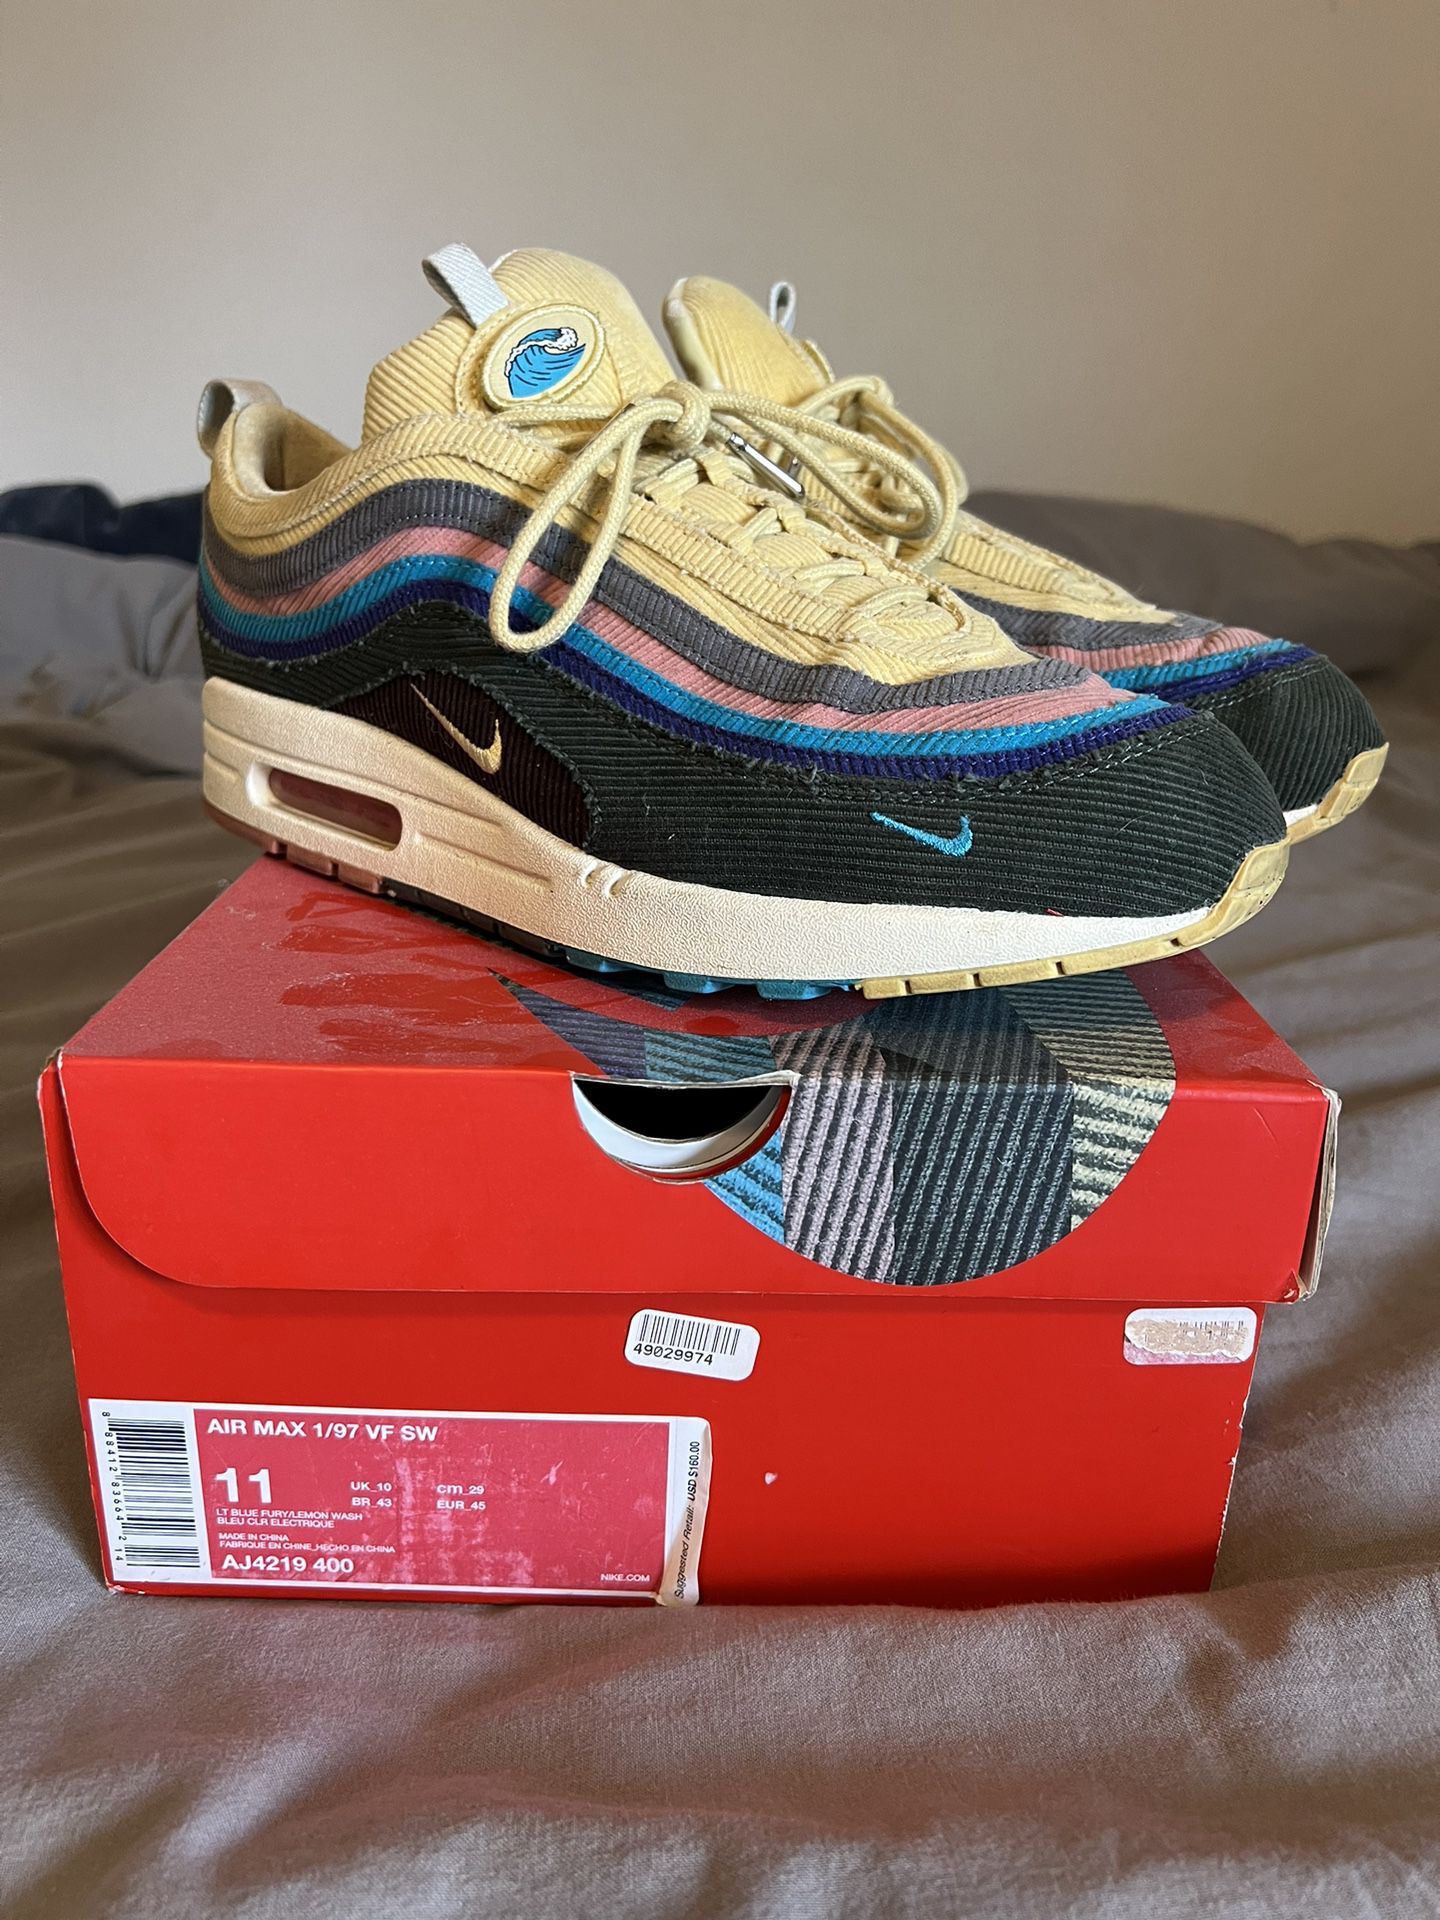 Sean Wotherspoon Air Max  for Sale in Renton, WA   OfferUp